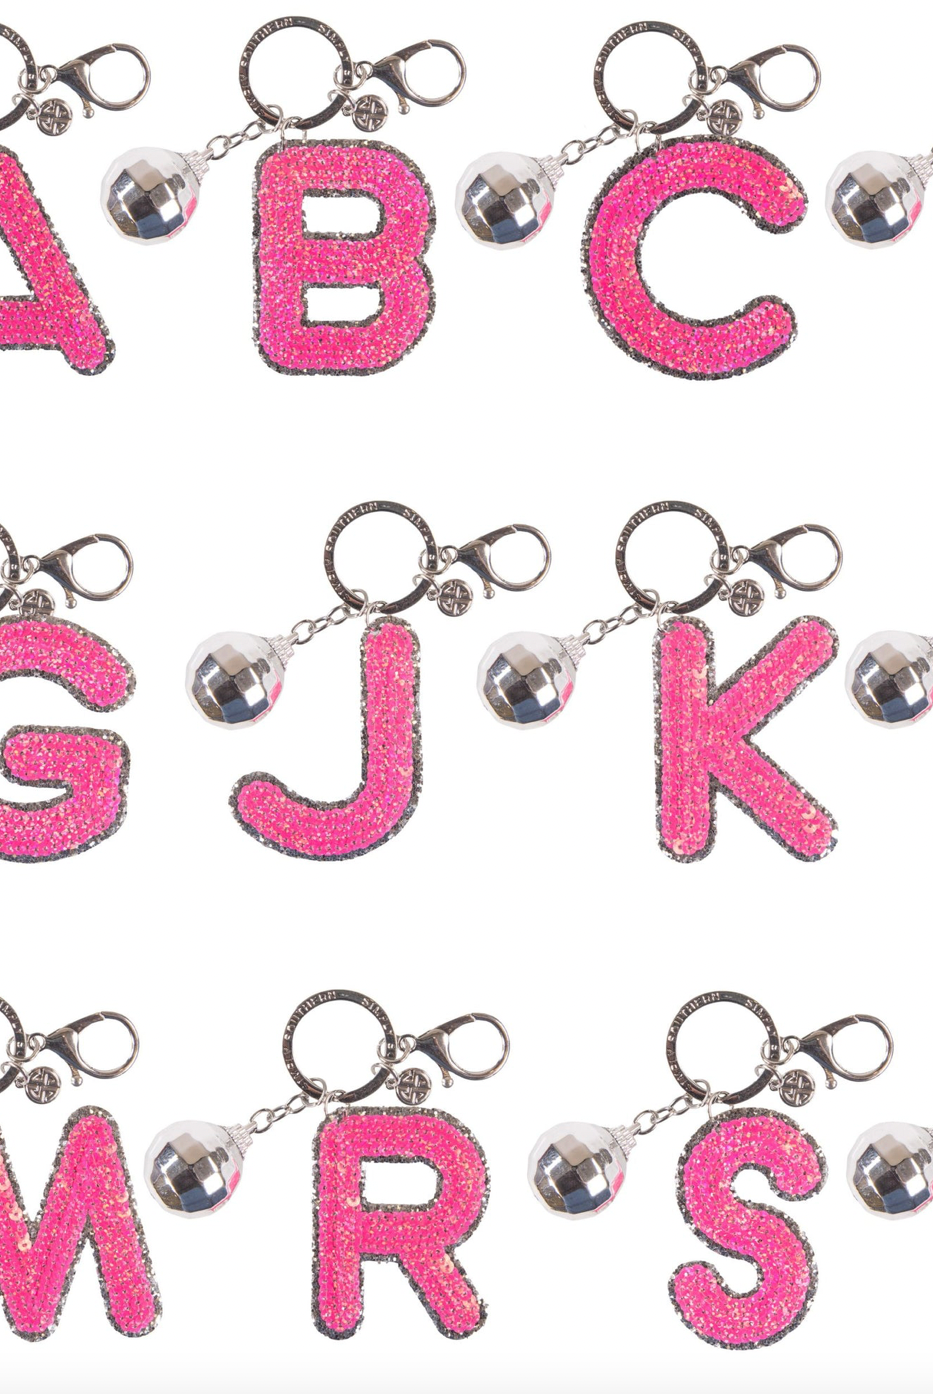 SS Disco Keychain-Keychains-Podos Boutique, a Women's Fashion Boutique Located in Calera, AL